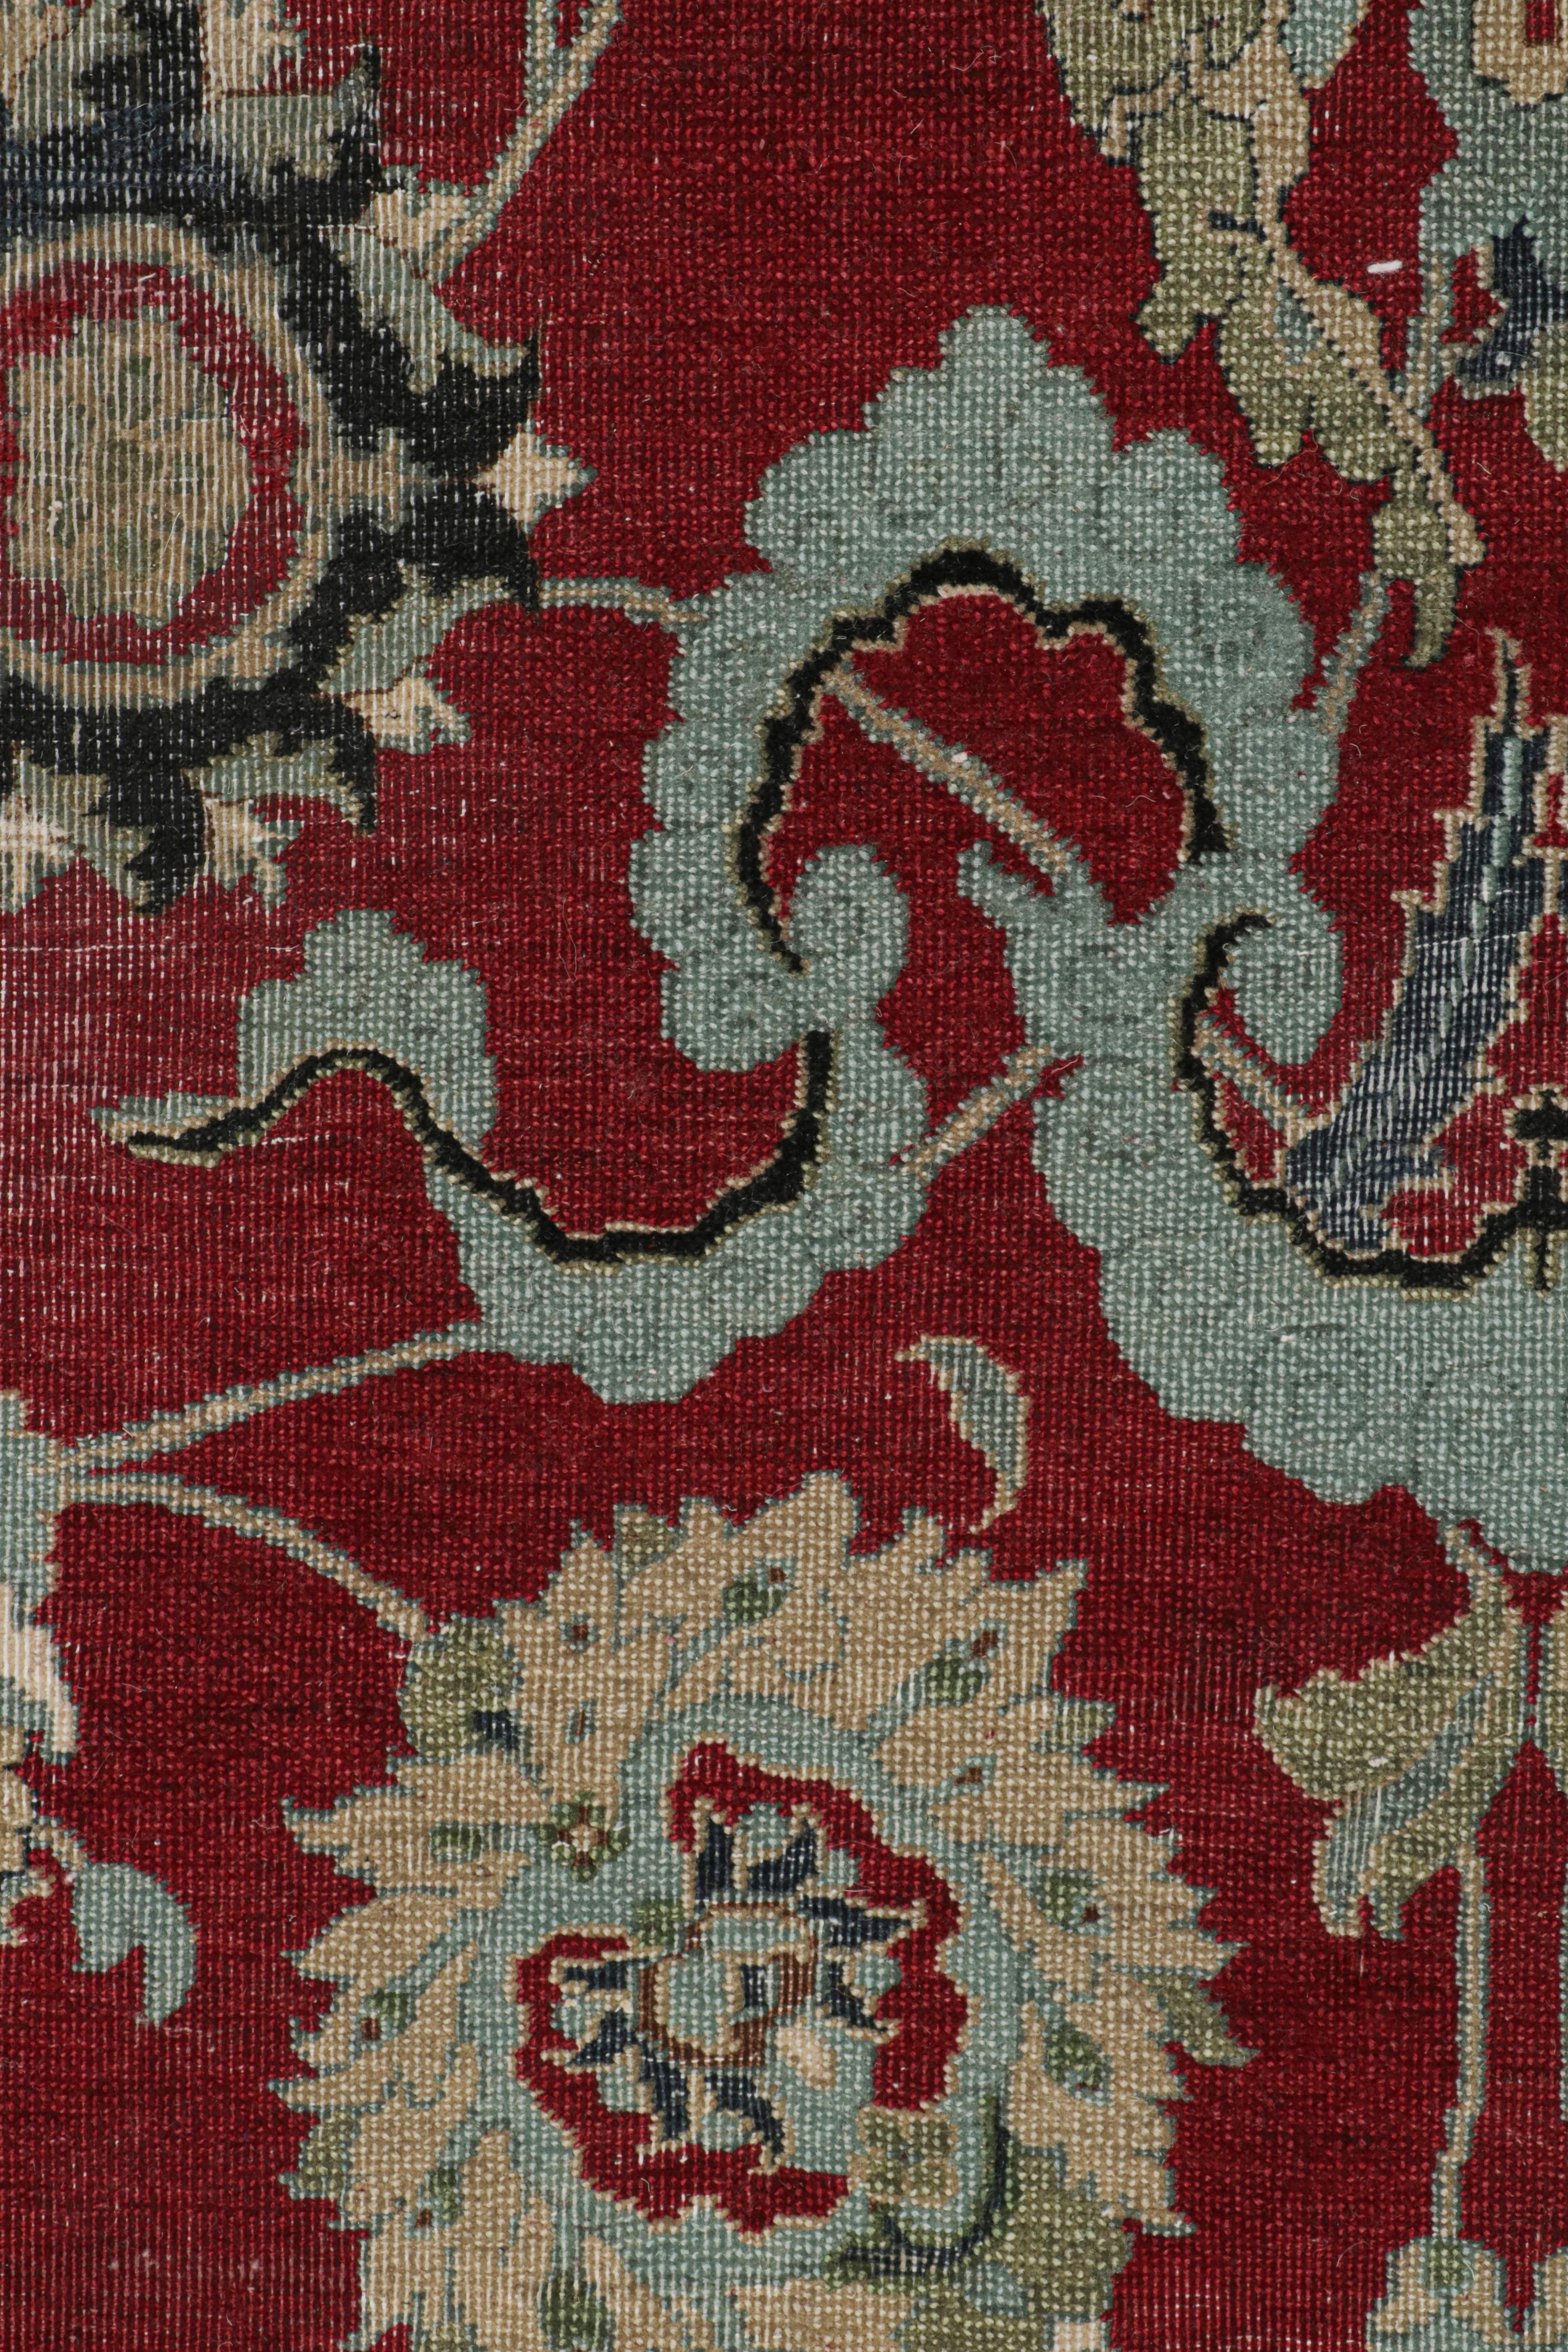 Moderne Rug & Kilim's Persian Isfahan Style Square Rug in Burgundy with Floral Patterns (tapis carré persan de style Ispahan à motifs floraux) en vente